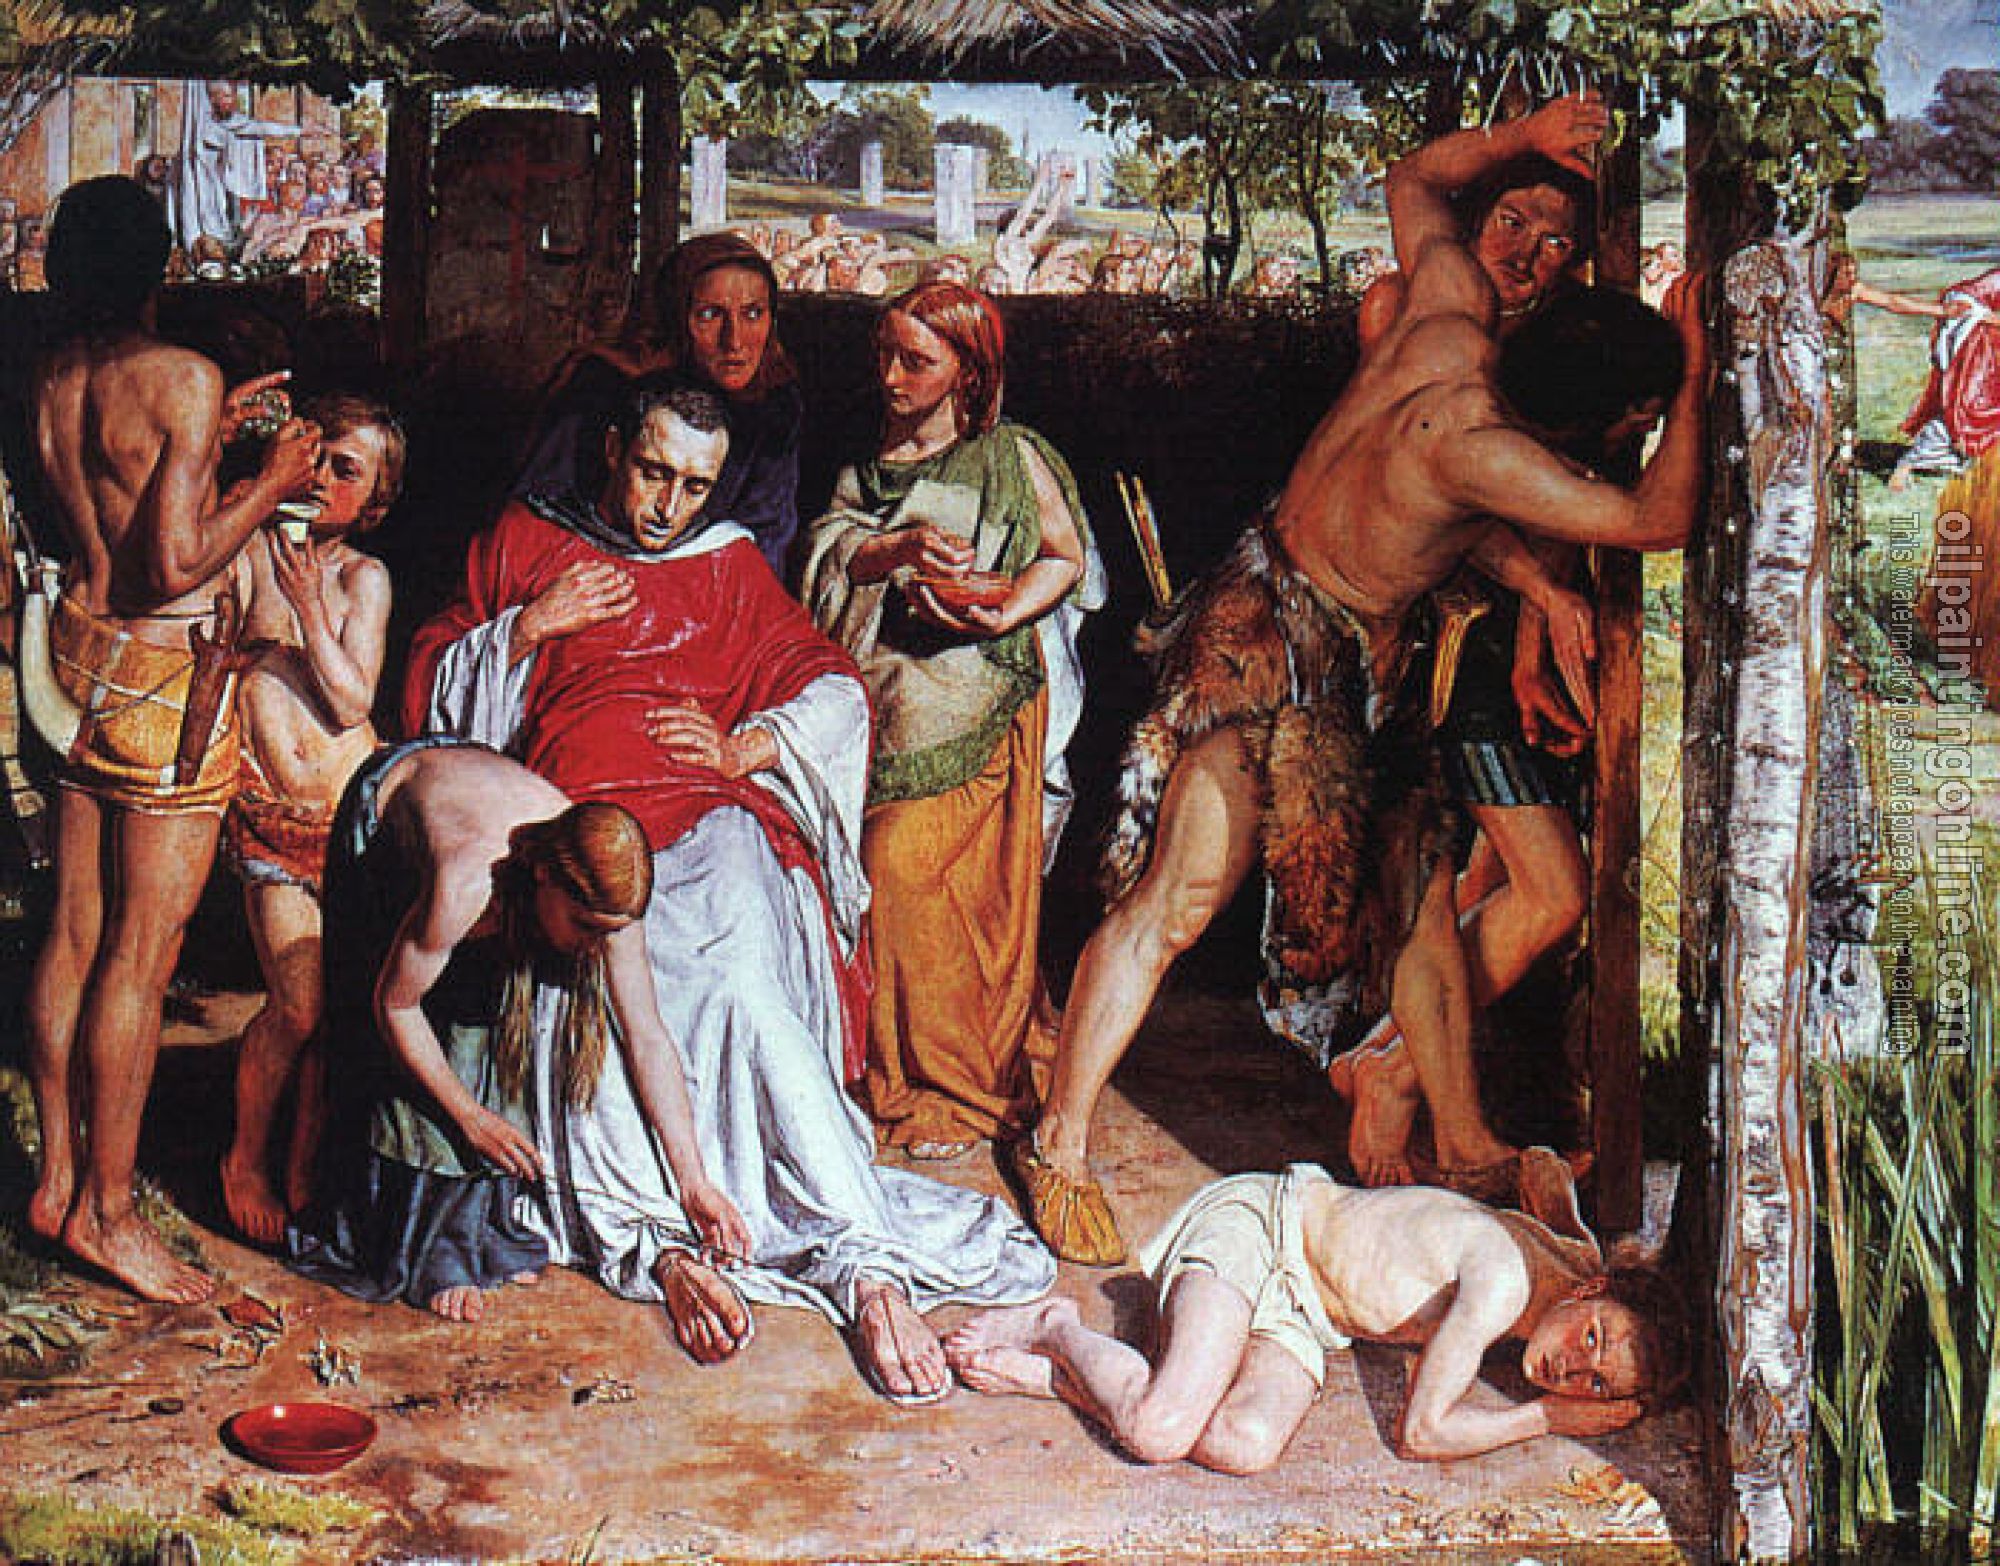 Hunt, William Holman - A Converted British Family Sheltering a Christian Missionary from the Persecution of the Druids